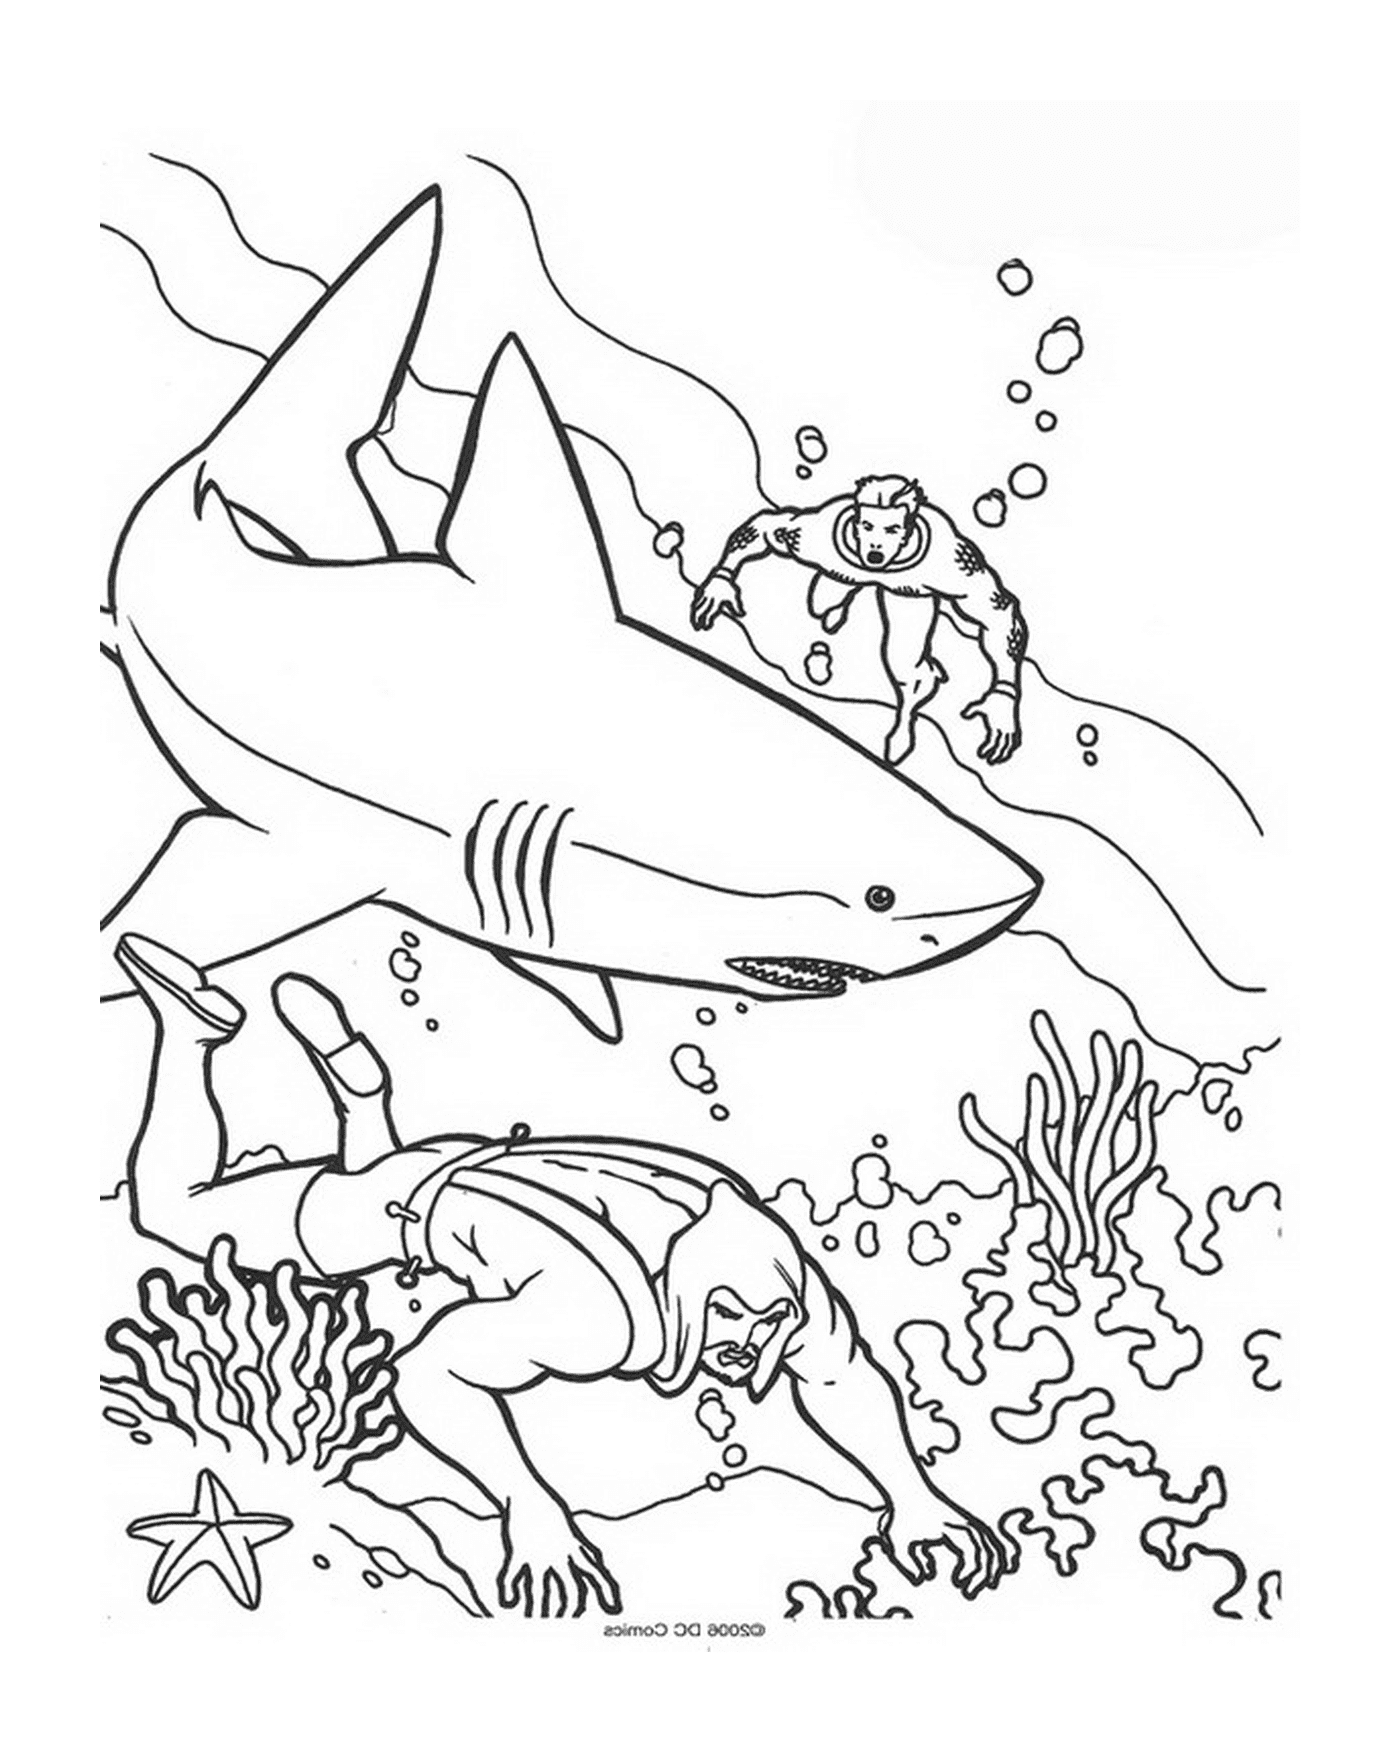  A man and a woman swimming in the ocean with sharks 